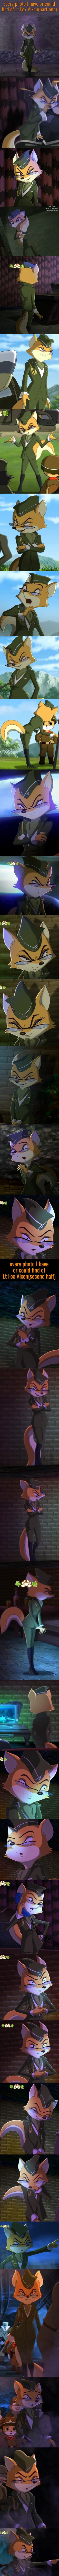 the complete LT Fox Vixen Photo Collection! | image tagged in cute,wholesome,tv show,north korea,movie,fox | made w/ Imgflip meme maker